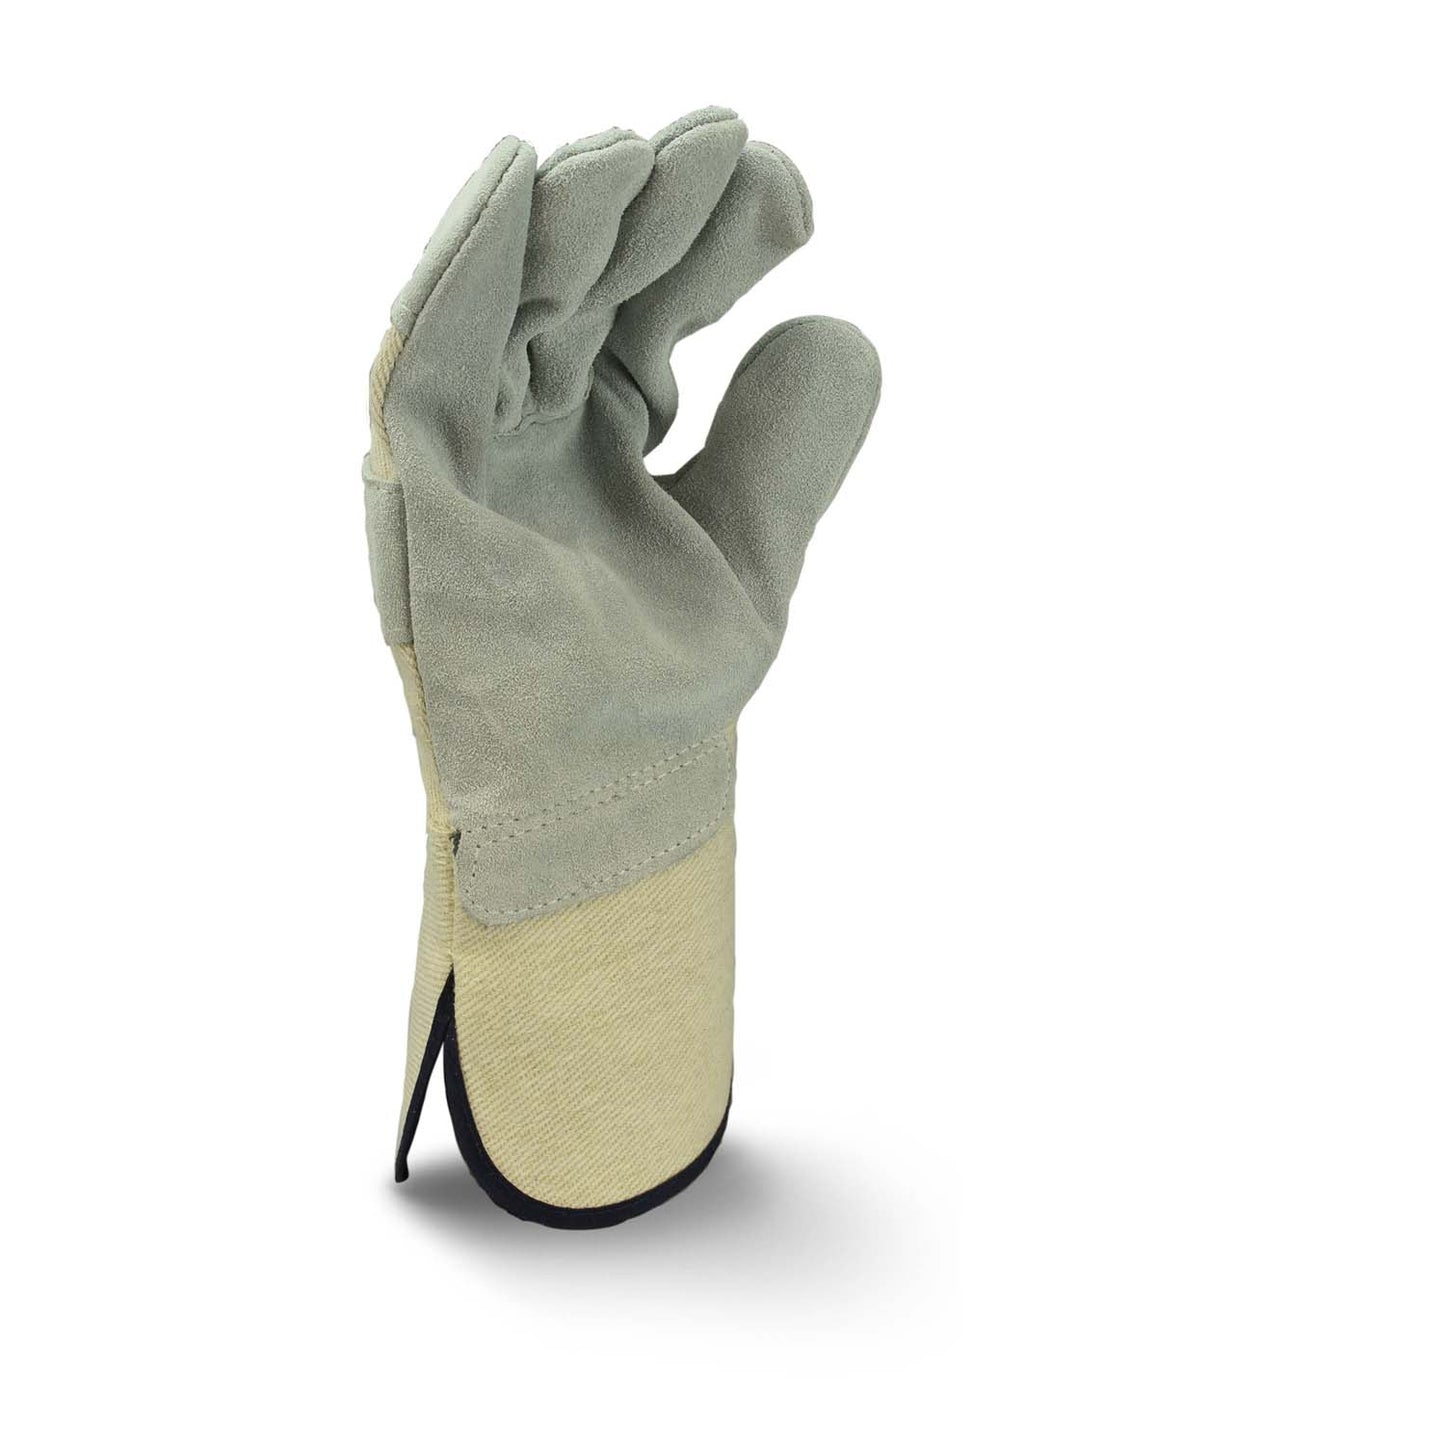 RADIANS RWG3400DPG SIDE SPLIT GRAY COWHIDE LEATHER DOUBLE PALM GLOVE WITH GAUNTLET CUFF